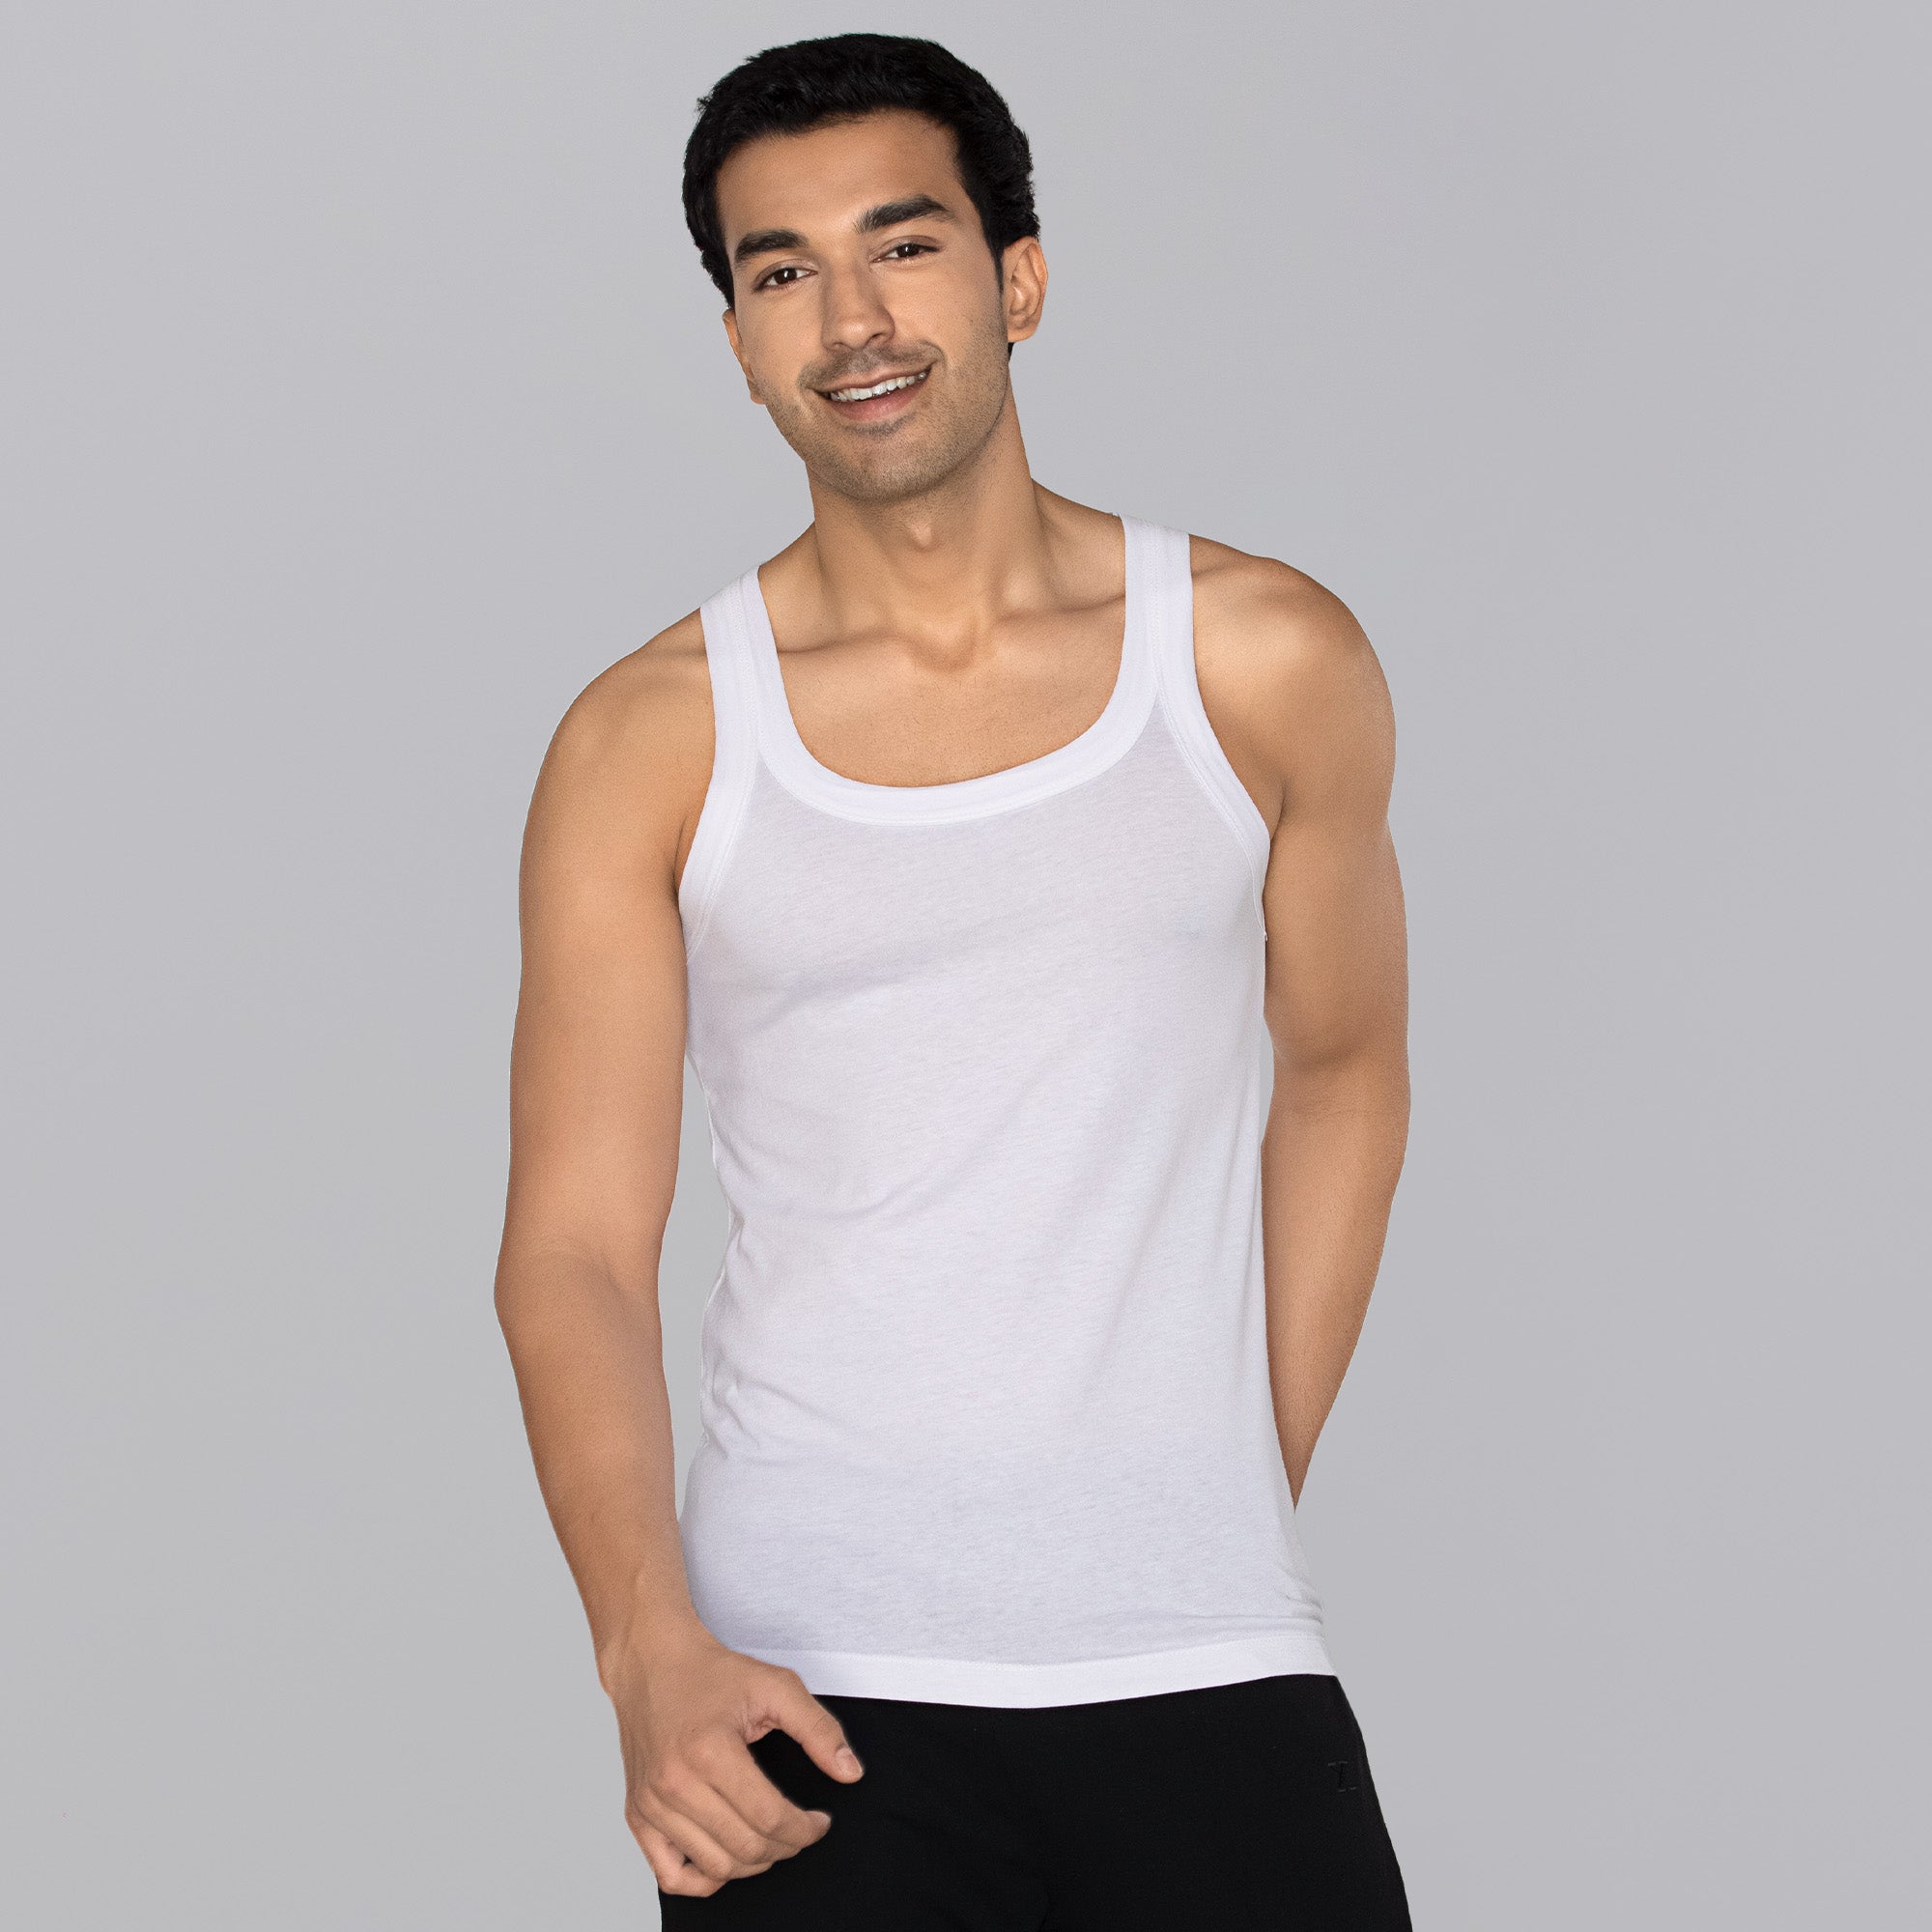 Buy Best Square Neck Fashion and Active Sports Vest for Men Online